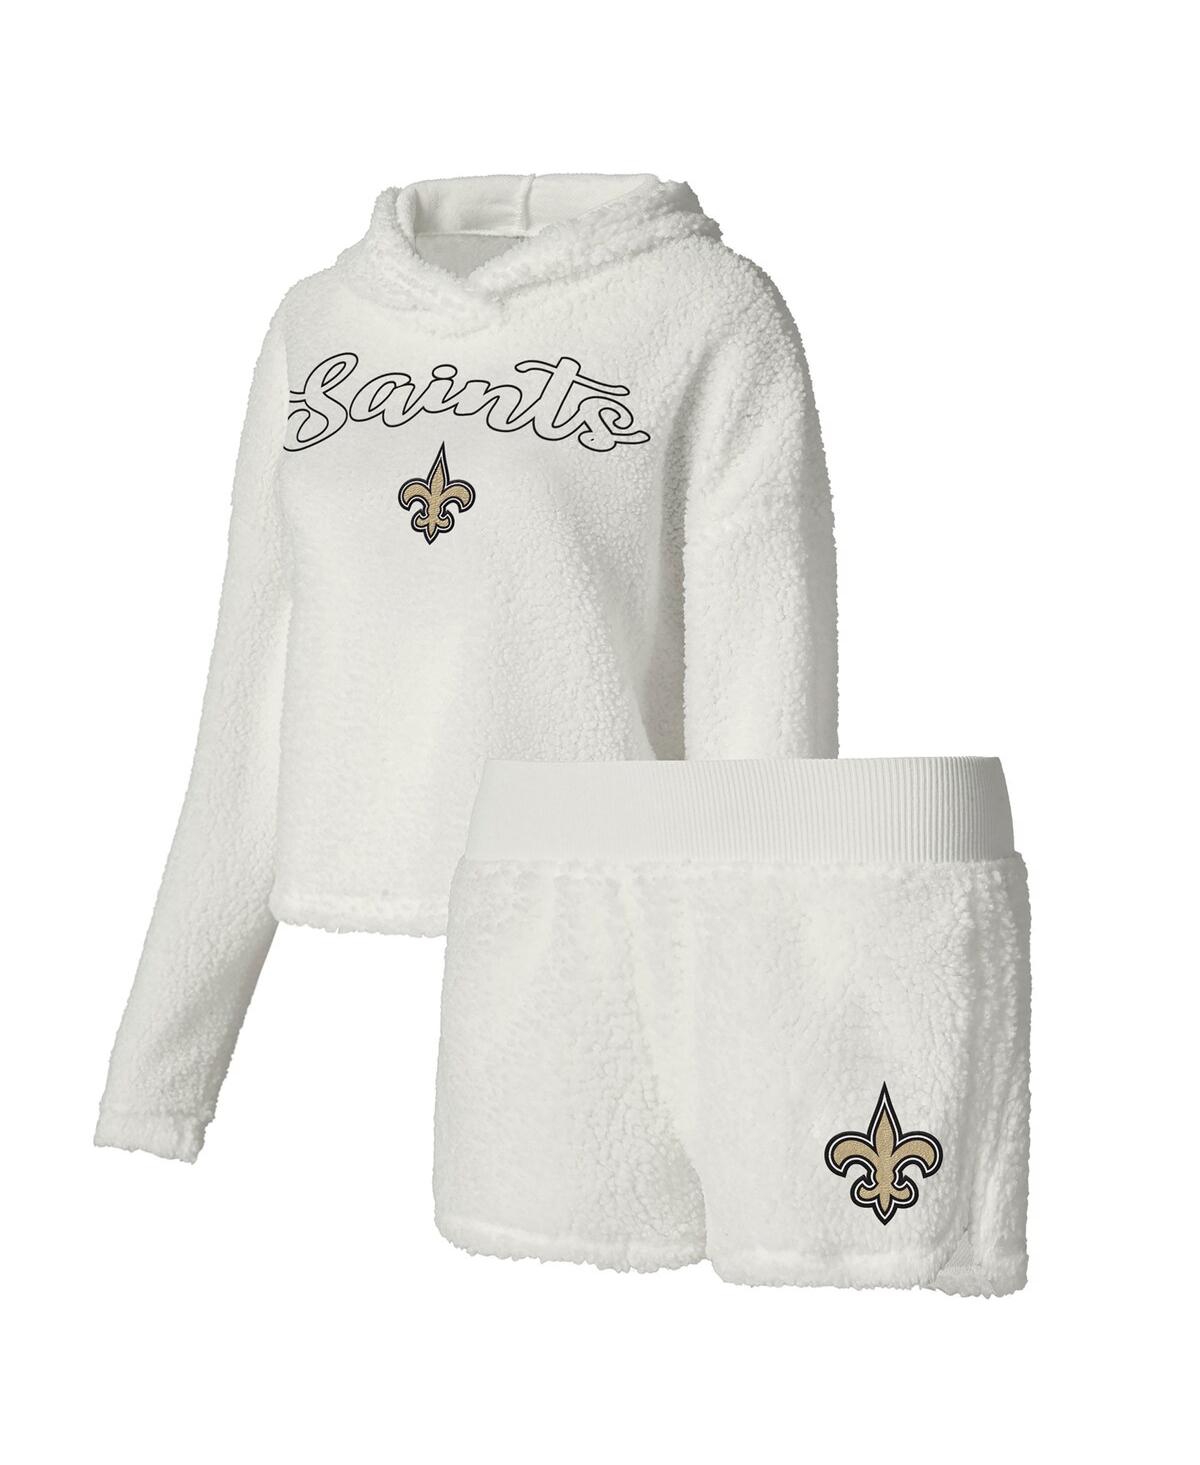 Concepts Sport Women's  White New Orleans Saints Fluffy Pullover Sweatshirt And Shorts Sleep Set